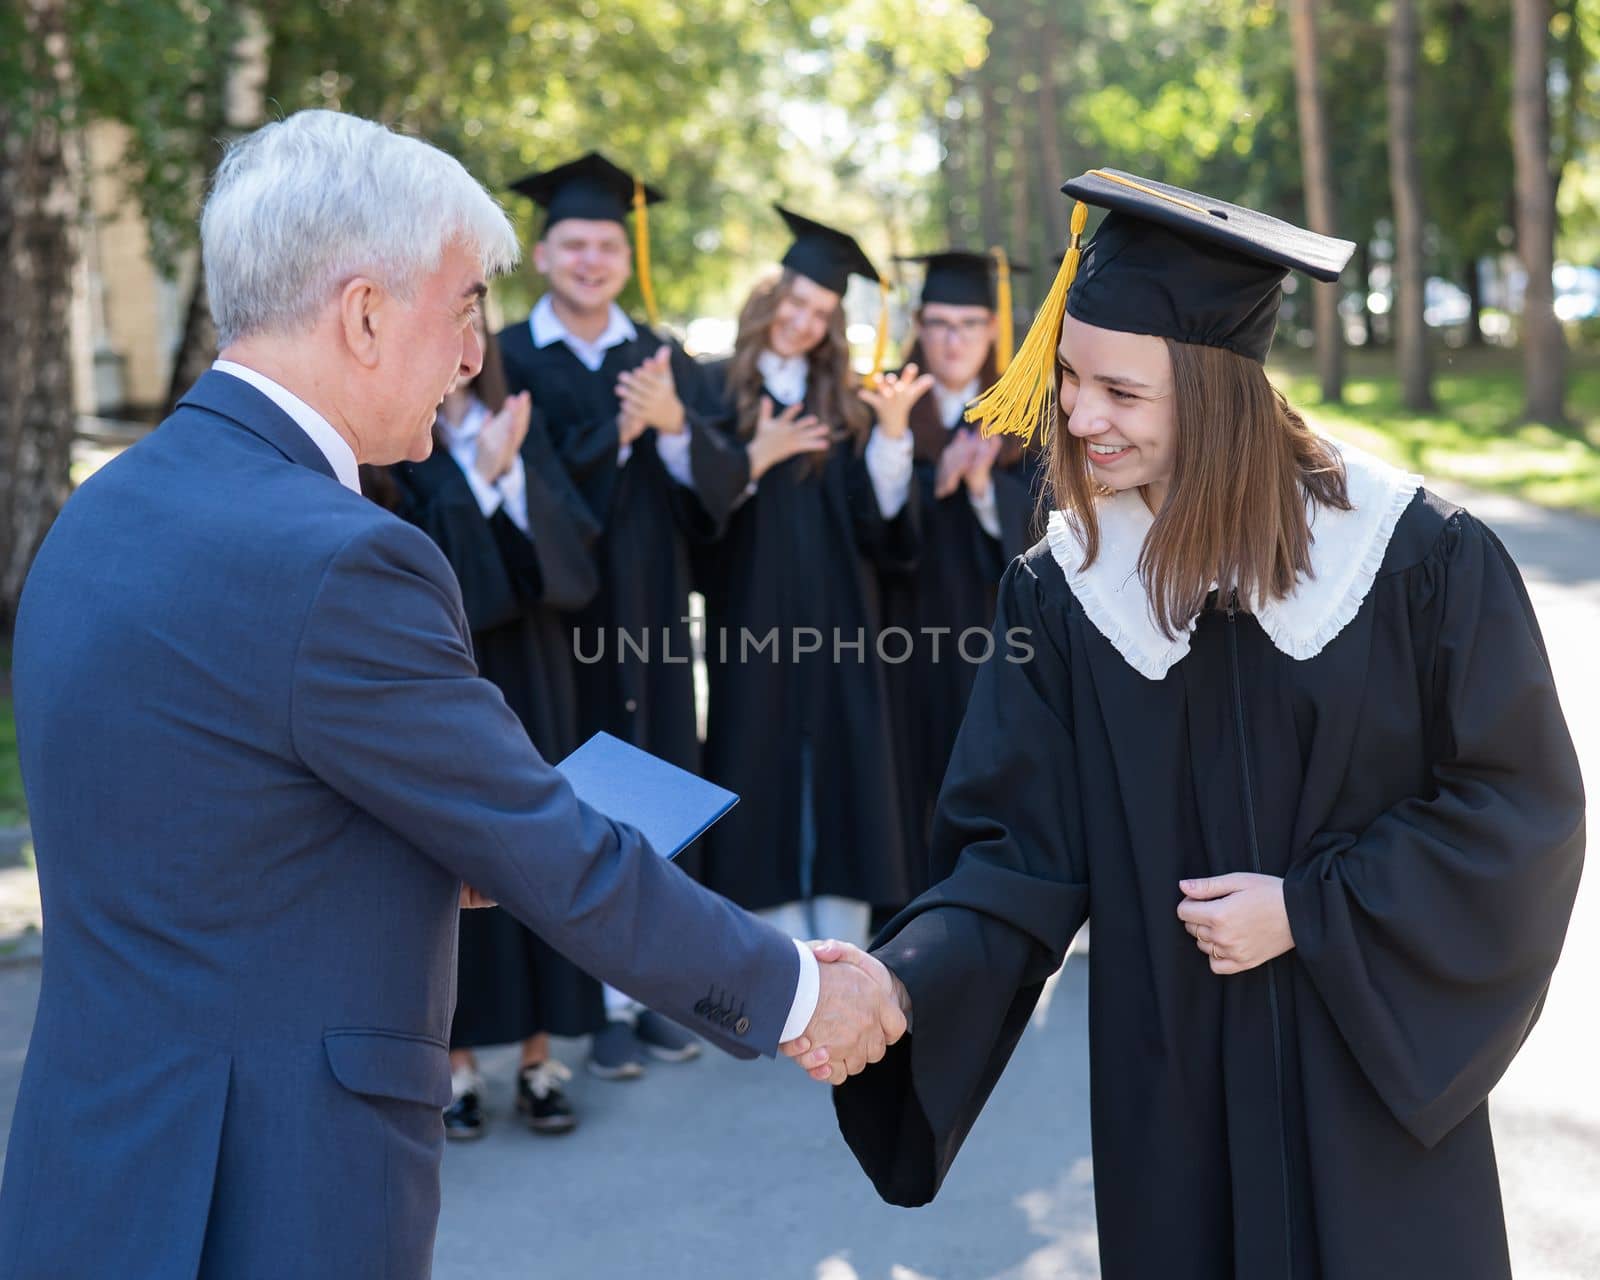 The teacher shakes hands with the student and presents the diploma outdoors. A group of university graduates